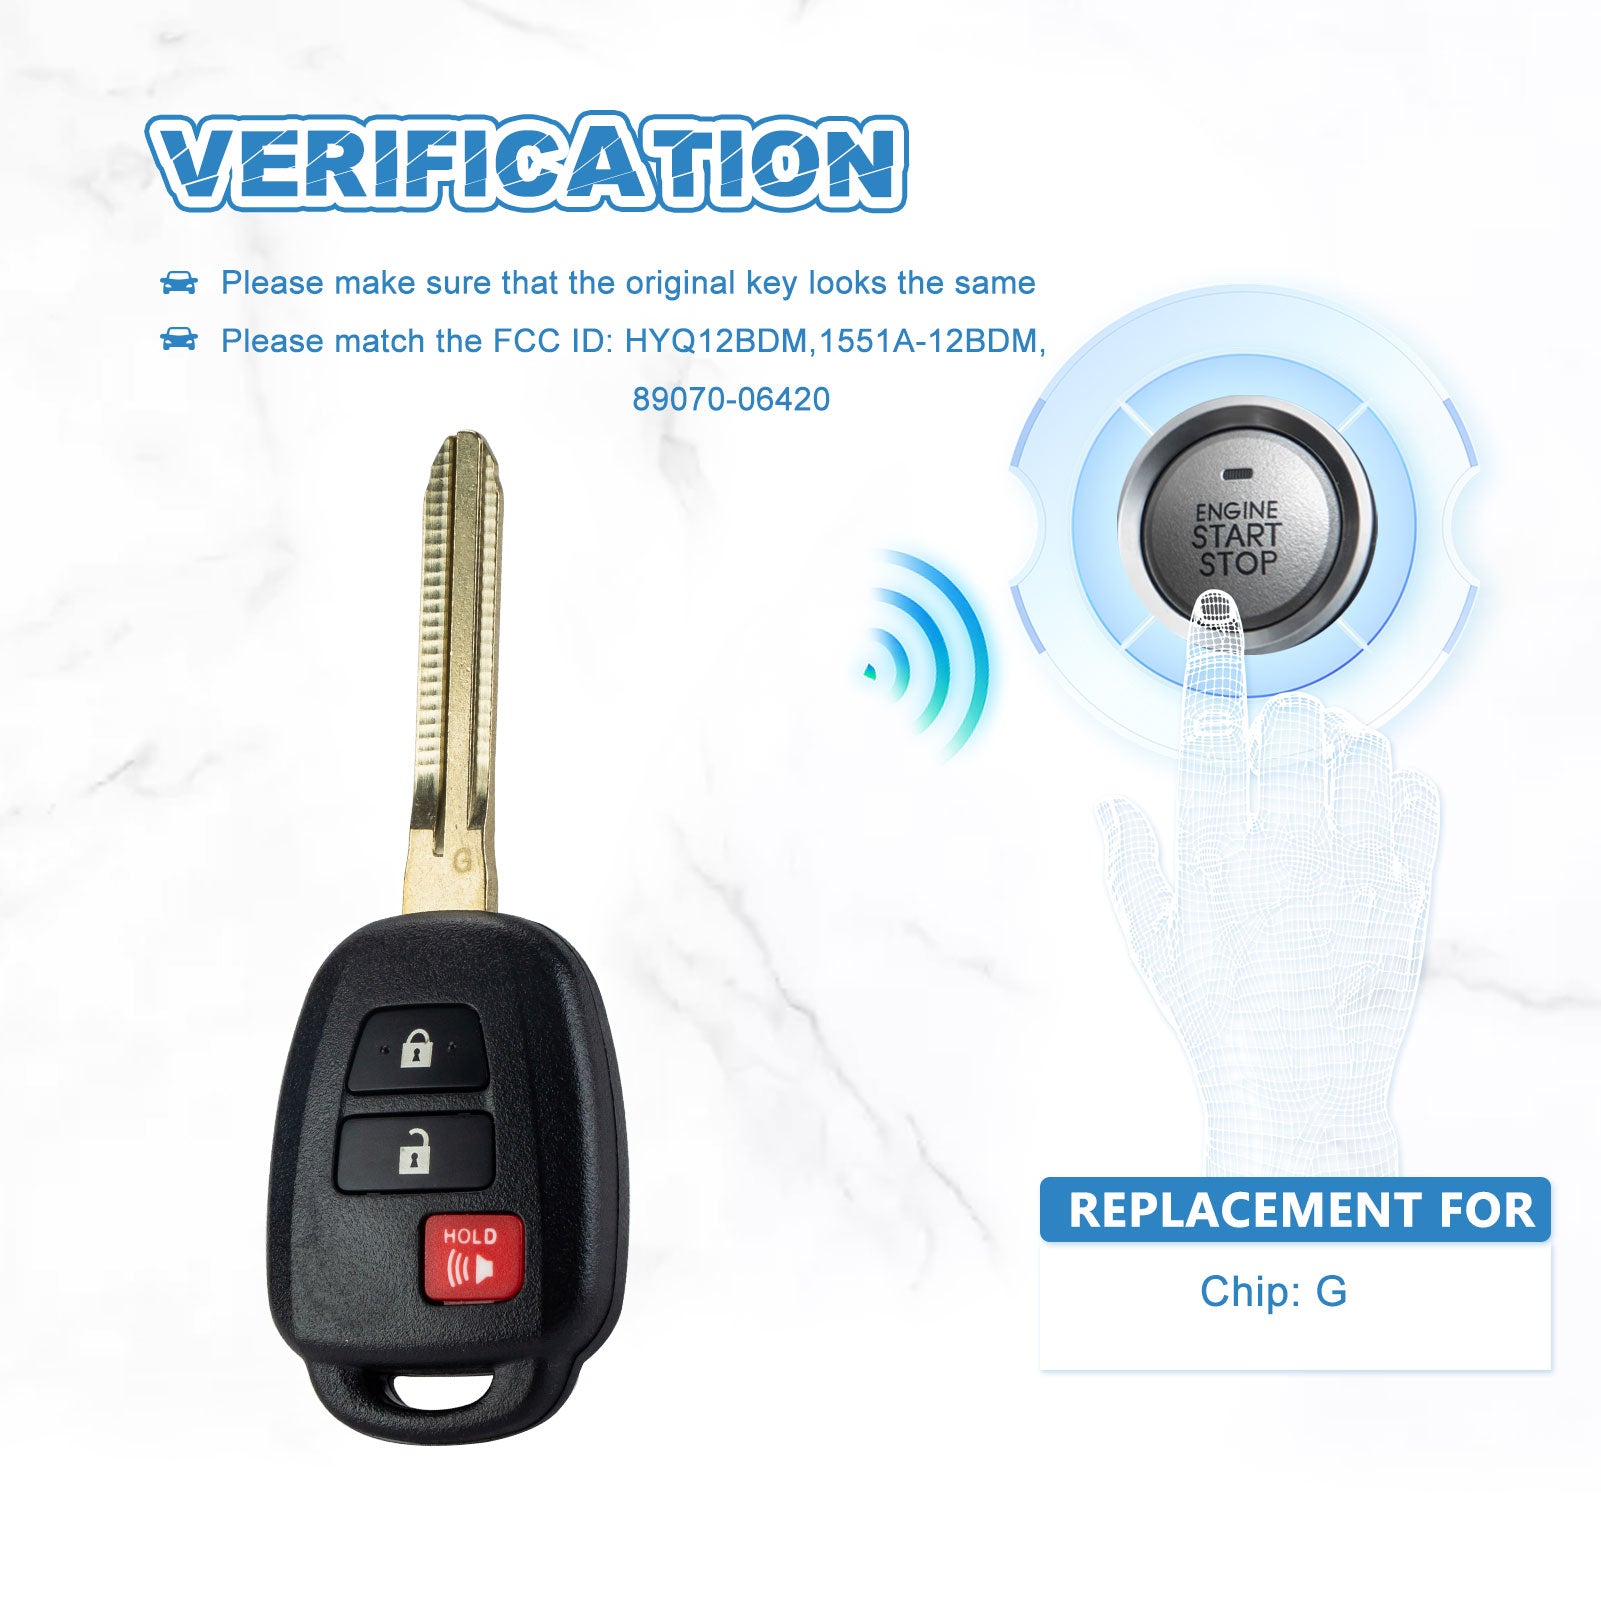 Replacement for Keyless Entry Remote Car Key Fob fit for Toyota 2012-2016 Prius C 3 Button G Chip HYQ12BDM KR-T3SB